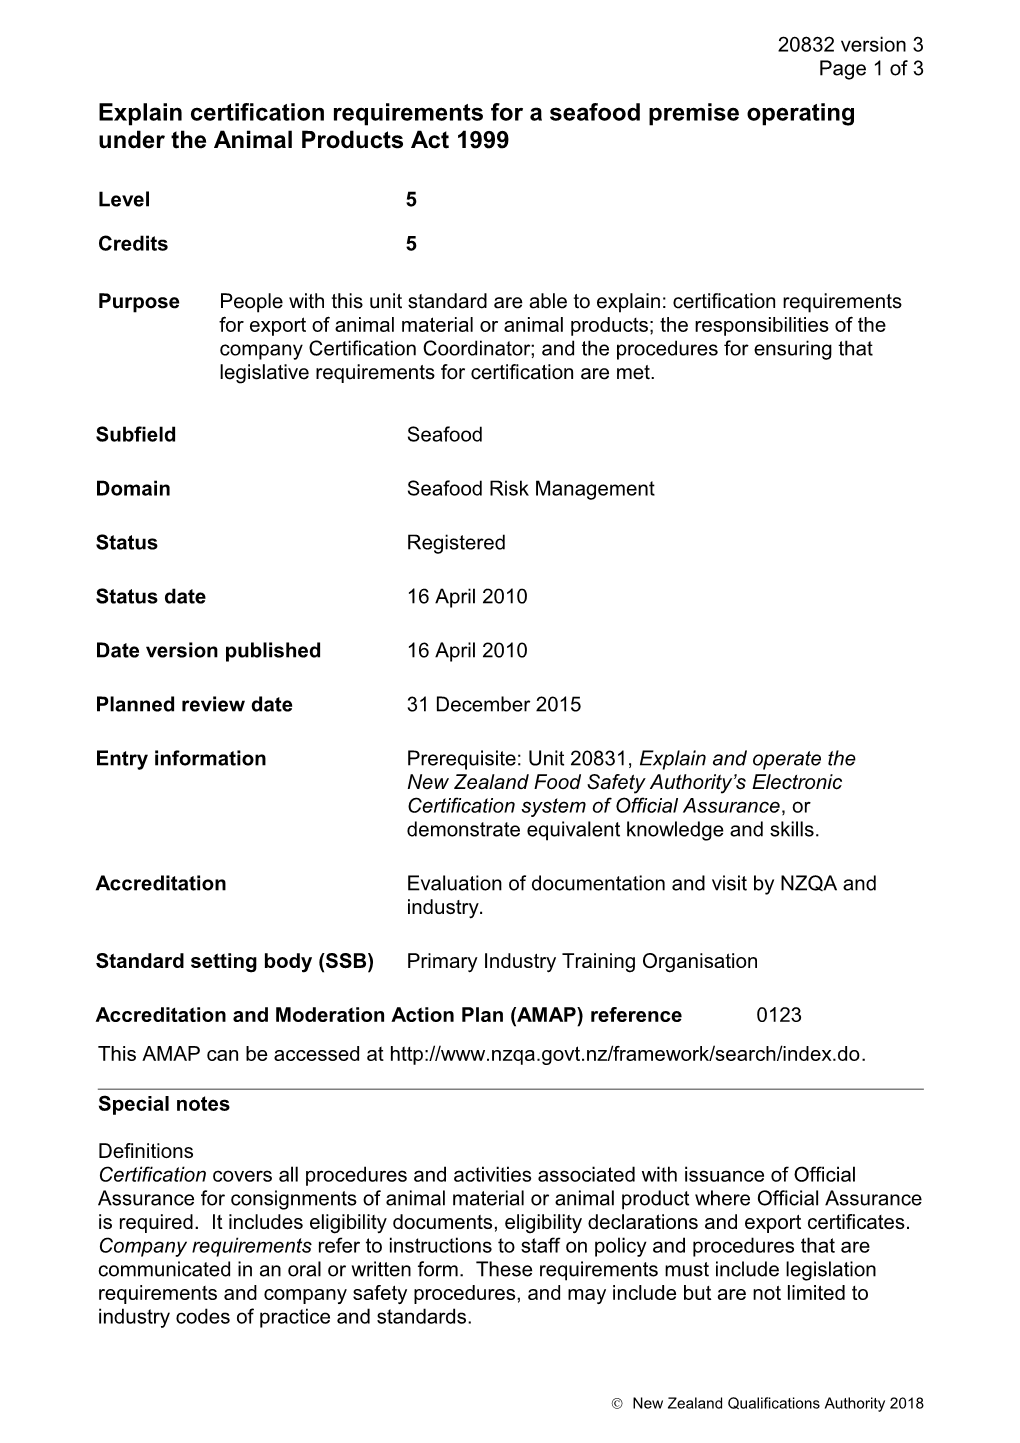 20832 Explain Certification Requirements for a Seafood Premise Operating Under the Animal